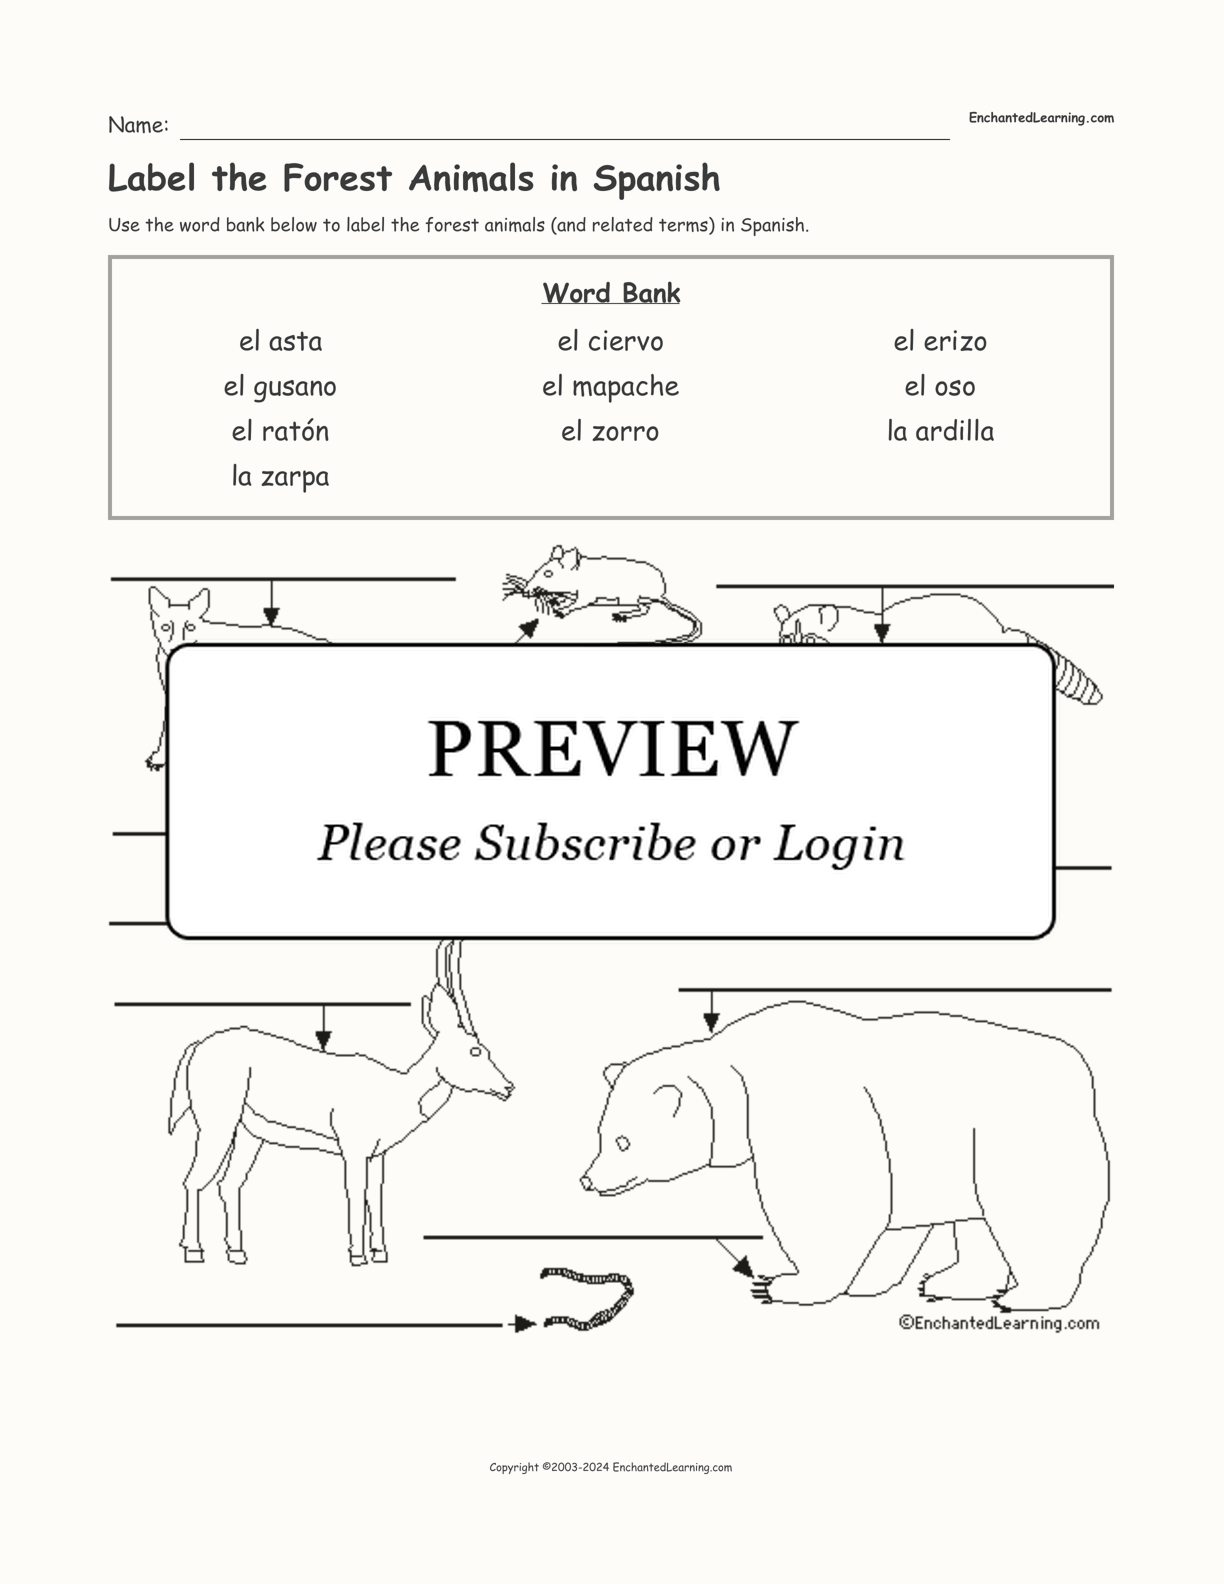 Label the Forest Animals in Spanish interactive worksheet page 1